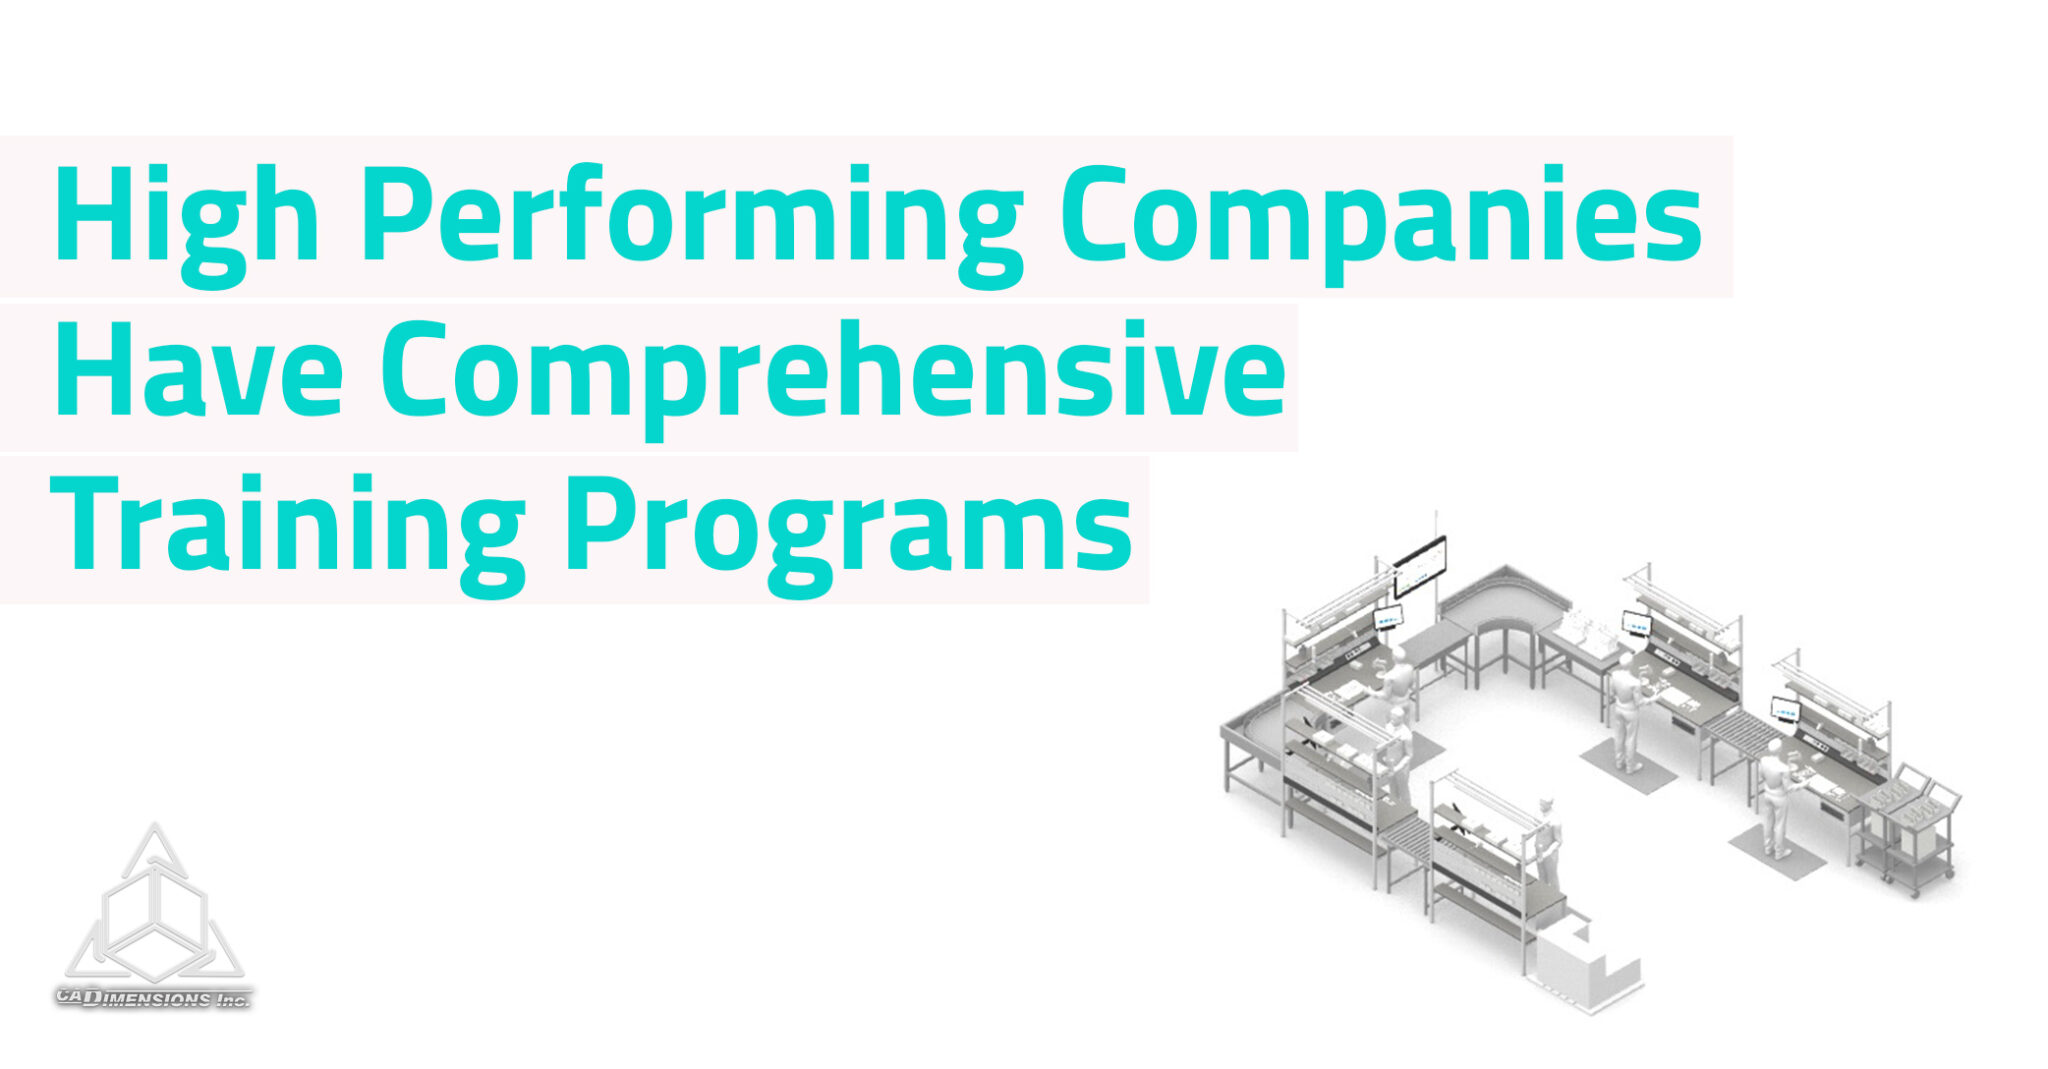 High Performing Companies Have Comprehensive Training Programs​